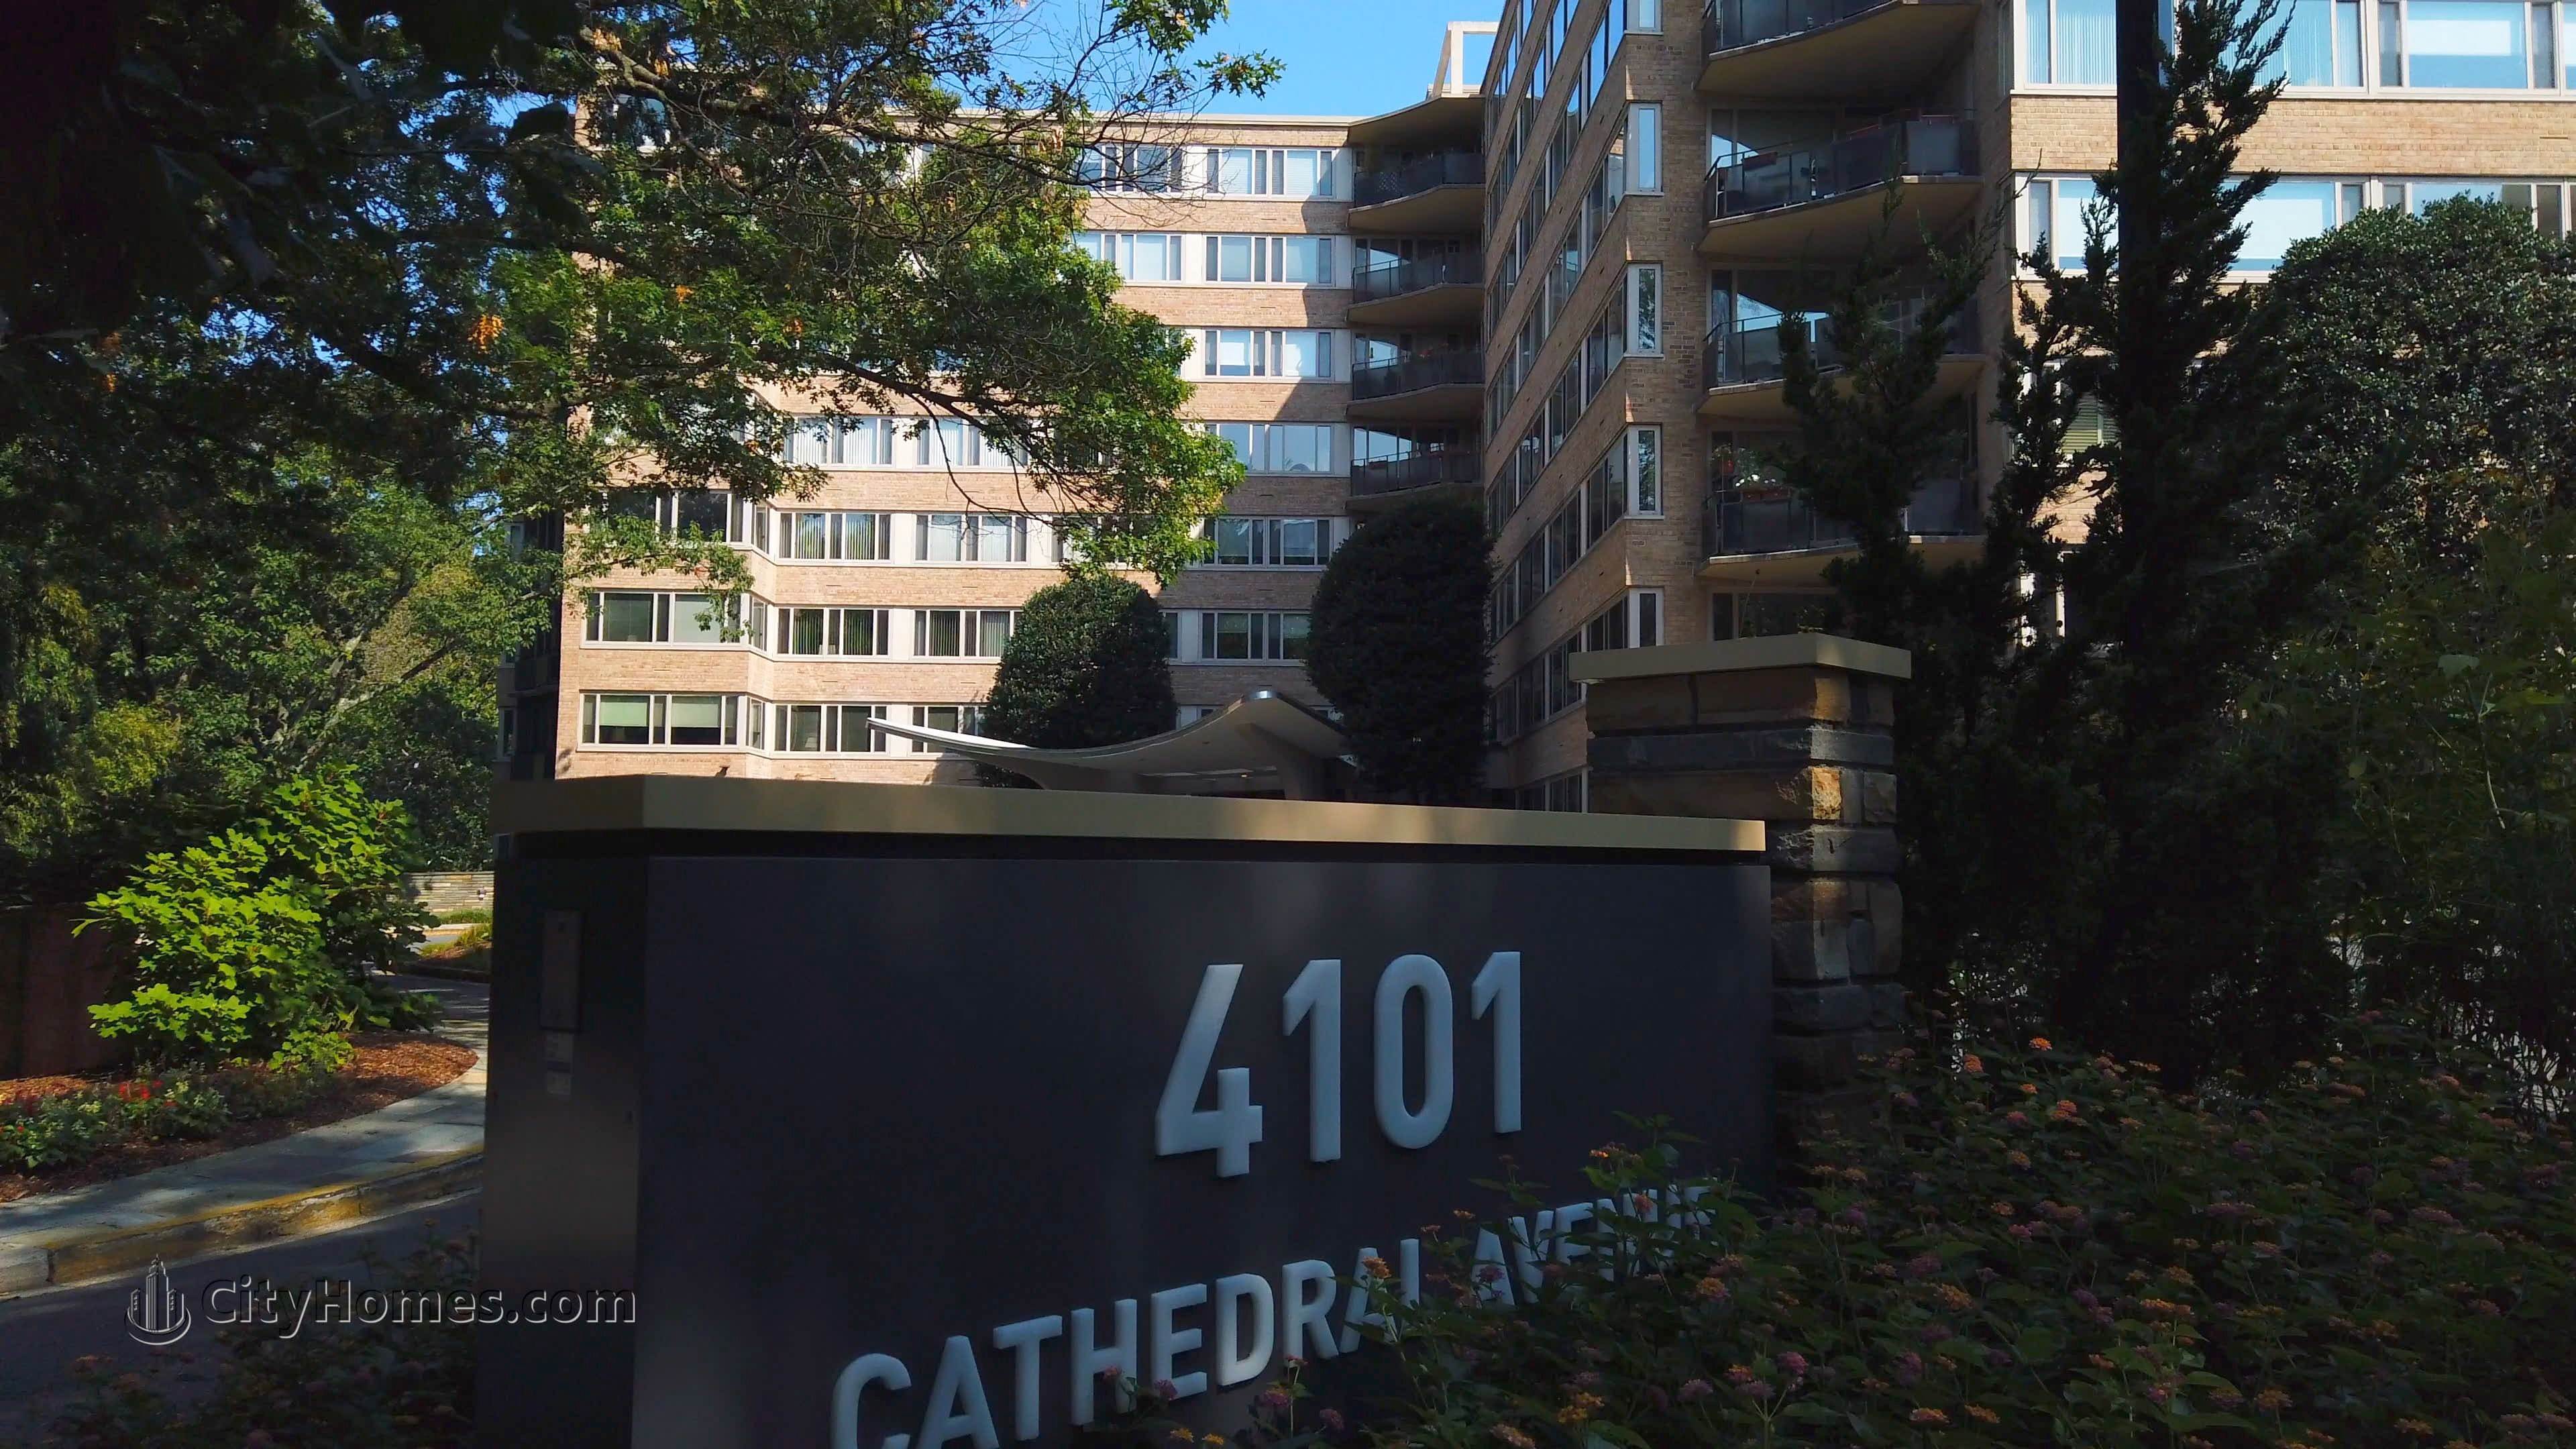 2. Cathedral Cooperative building at 4101 Cathedral Ave NW, Observatory Circle, Washington, DC 20016